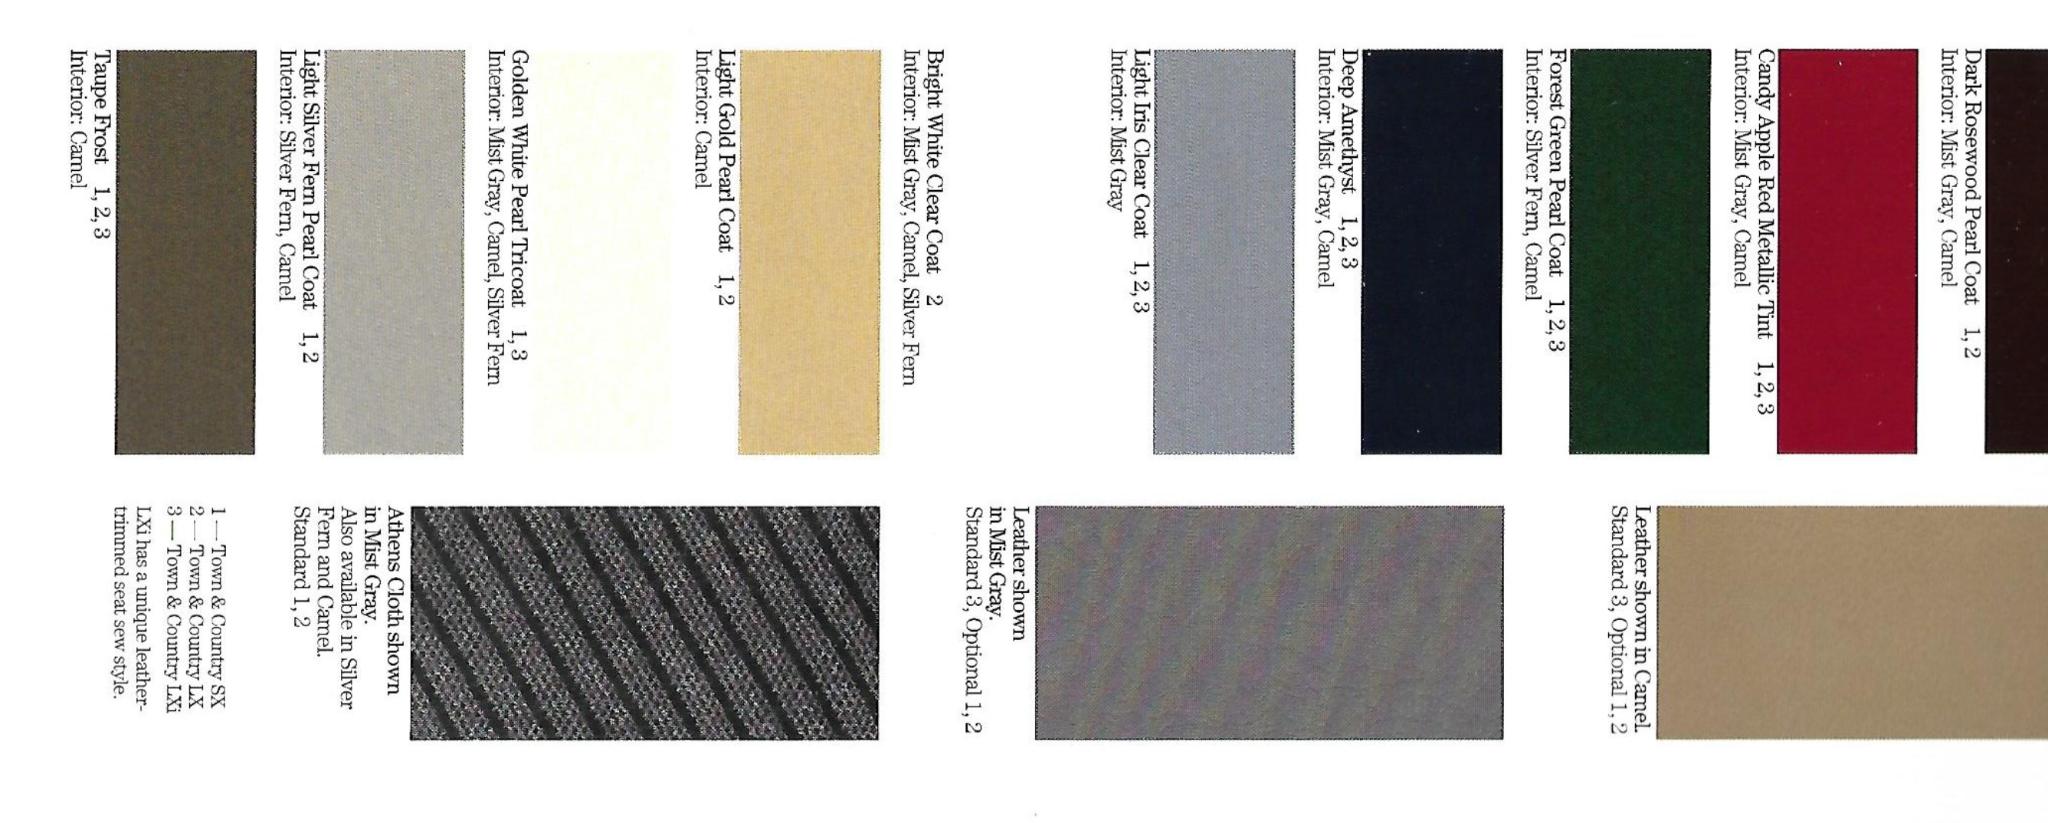 Color shade examples for Chrysler Town & Country Van Exterior Colors